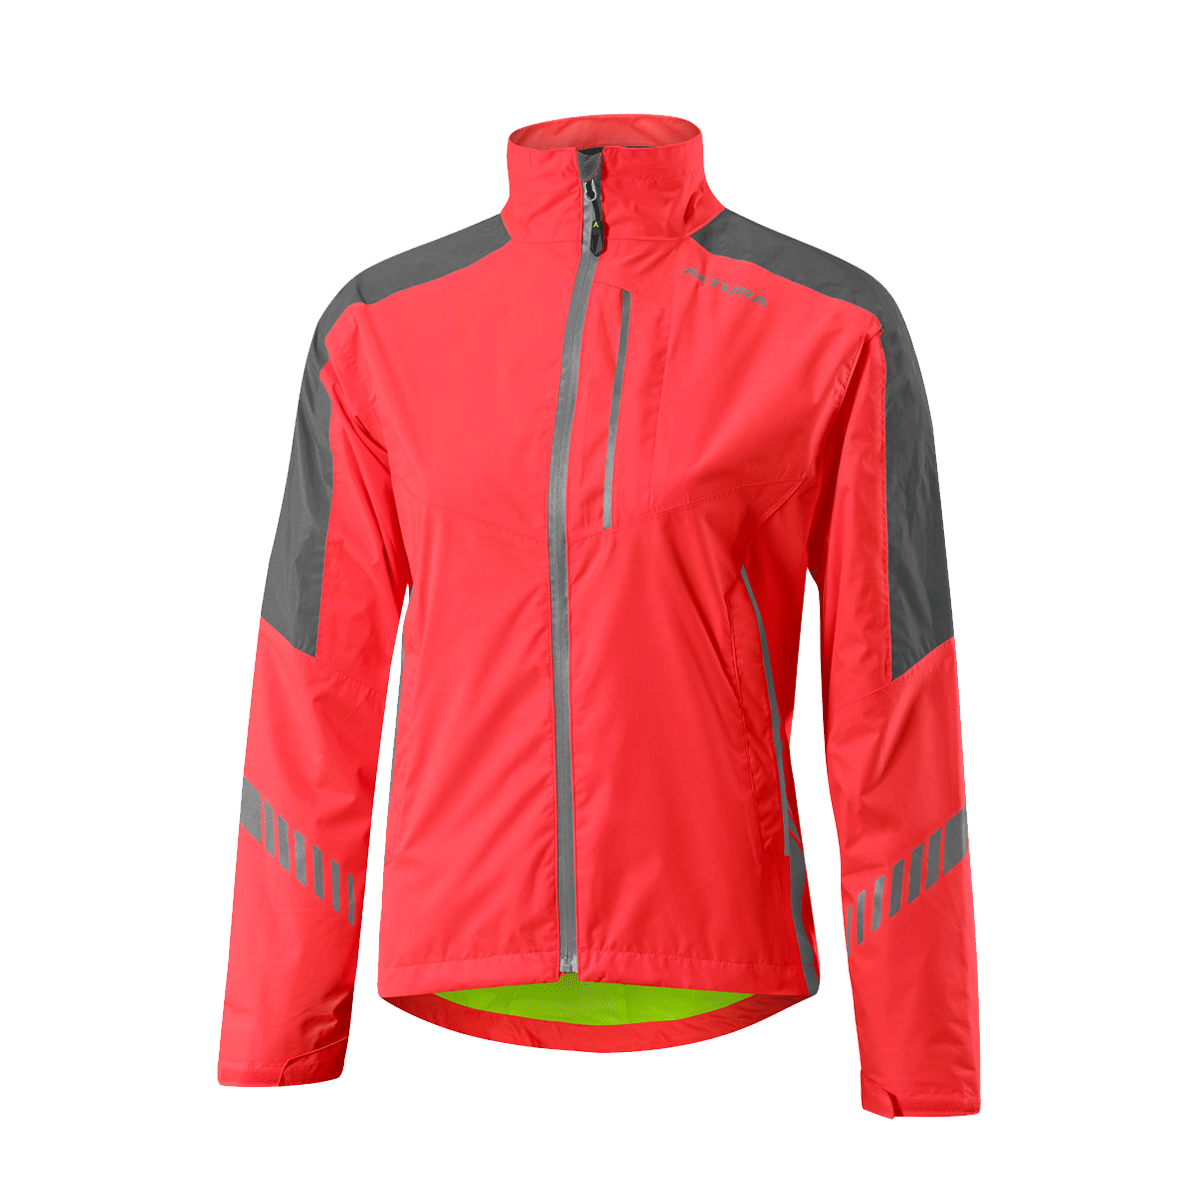 Pink Jacket For Women Free PNG Image